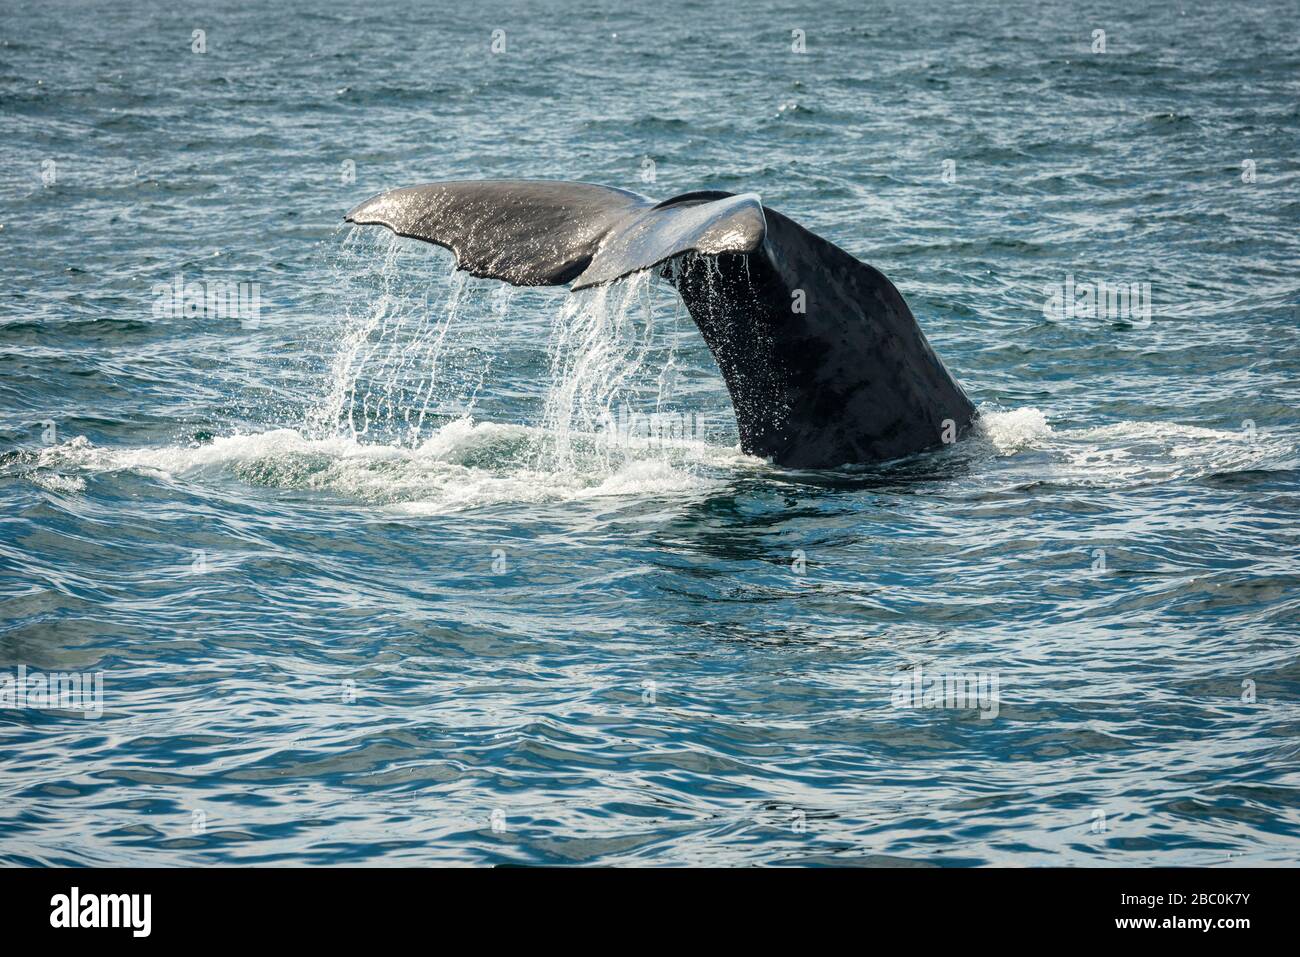 A Sperm whale in the Southern Pacific Ocean at Kaikoura New Zealand raises its tail as it dives to feed. Stock Photo